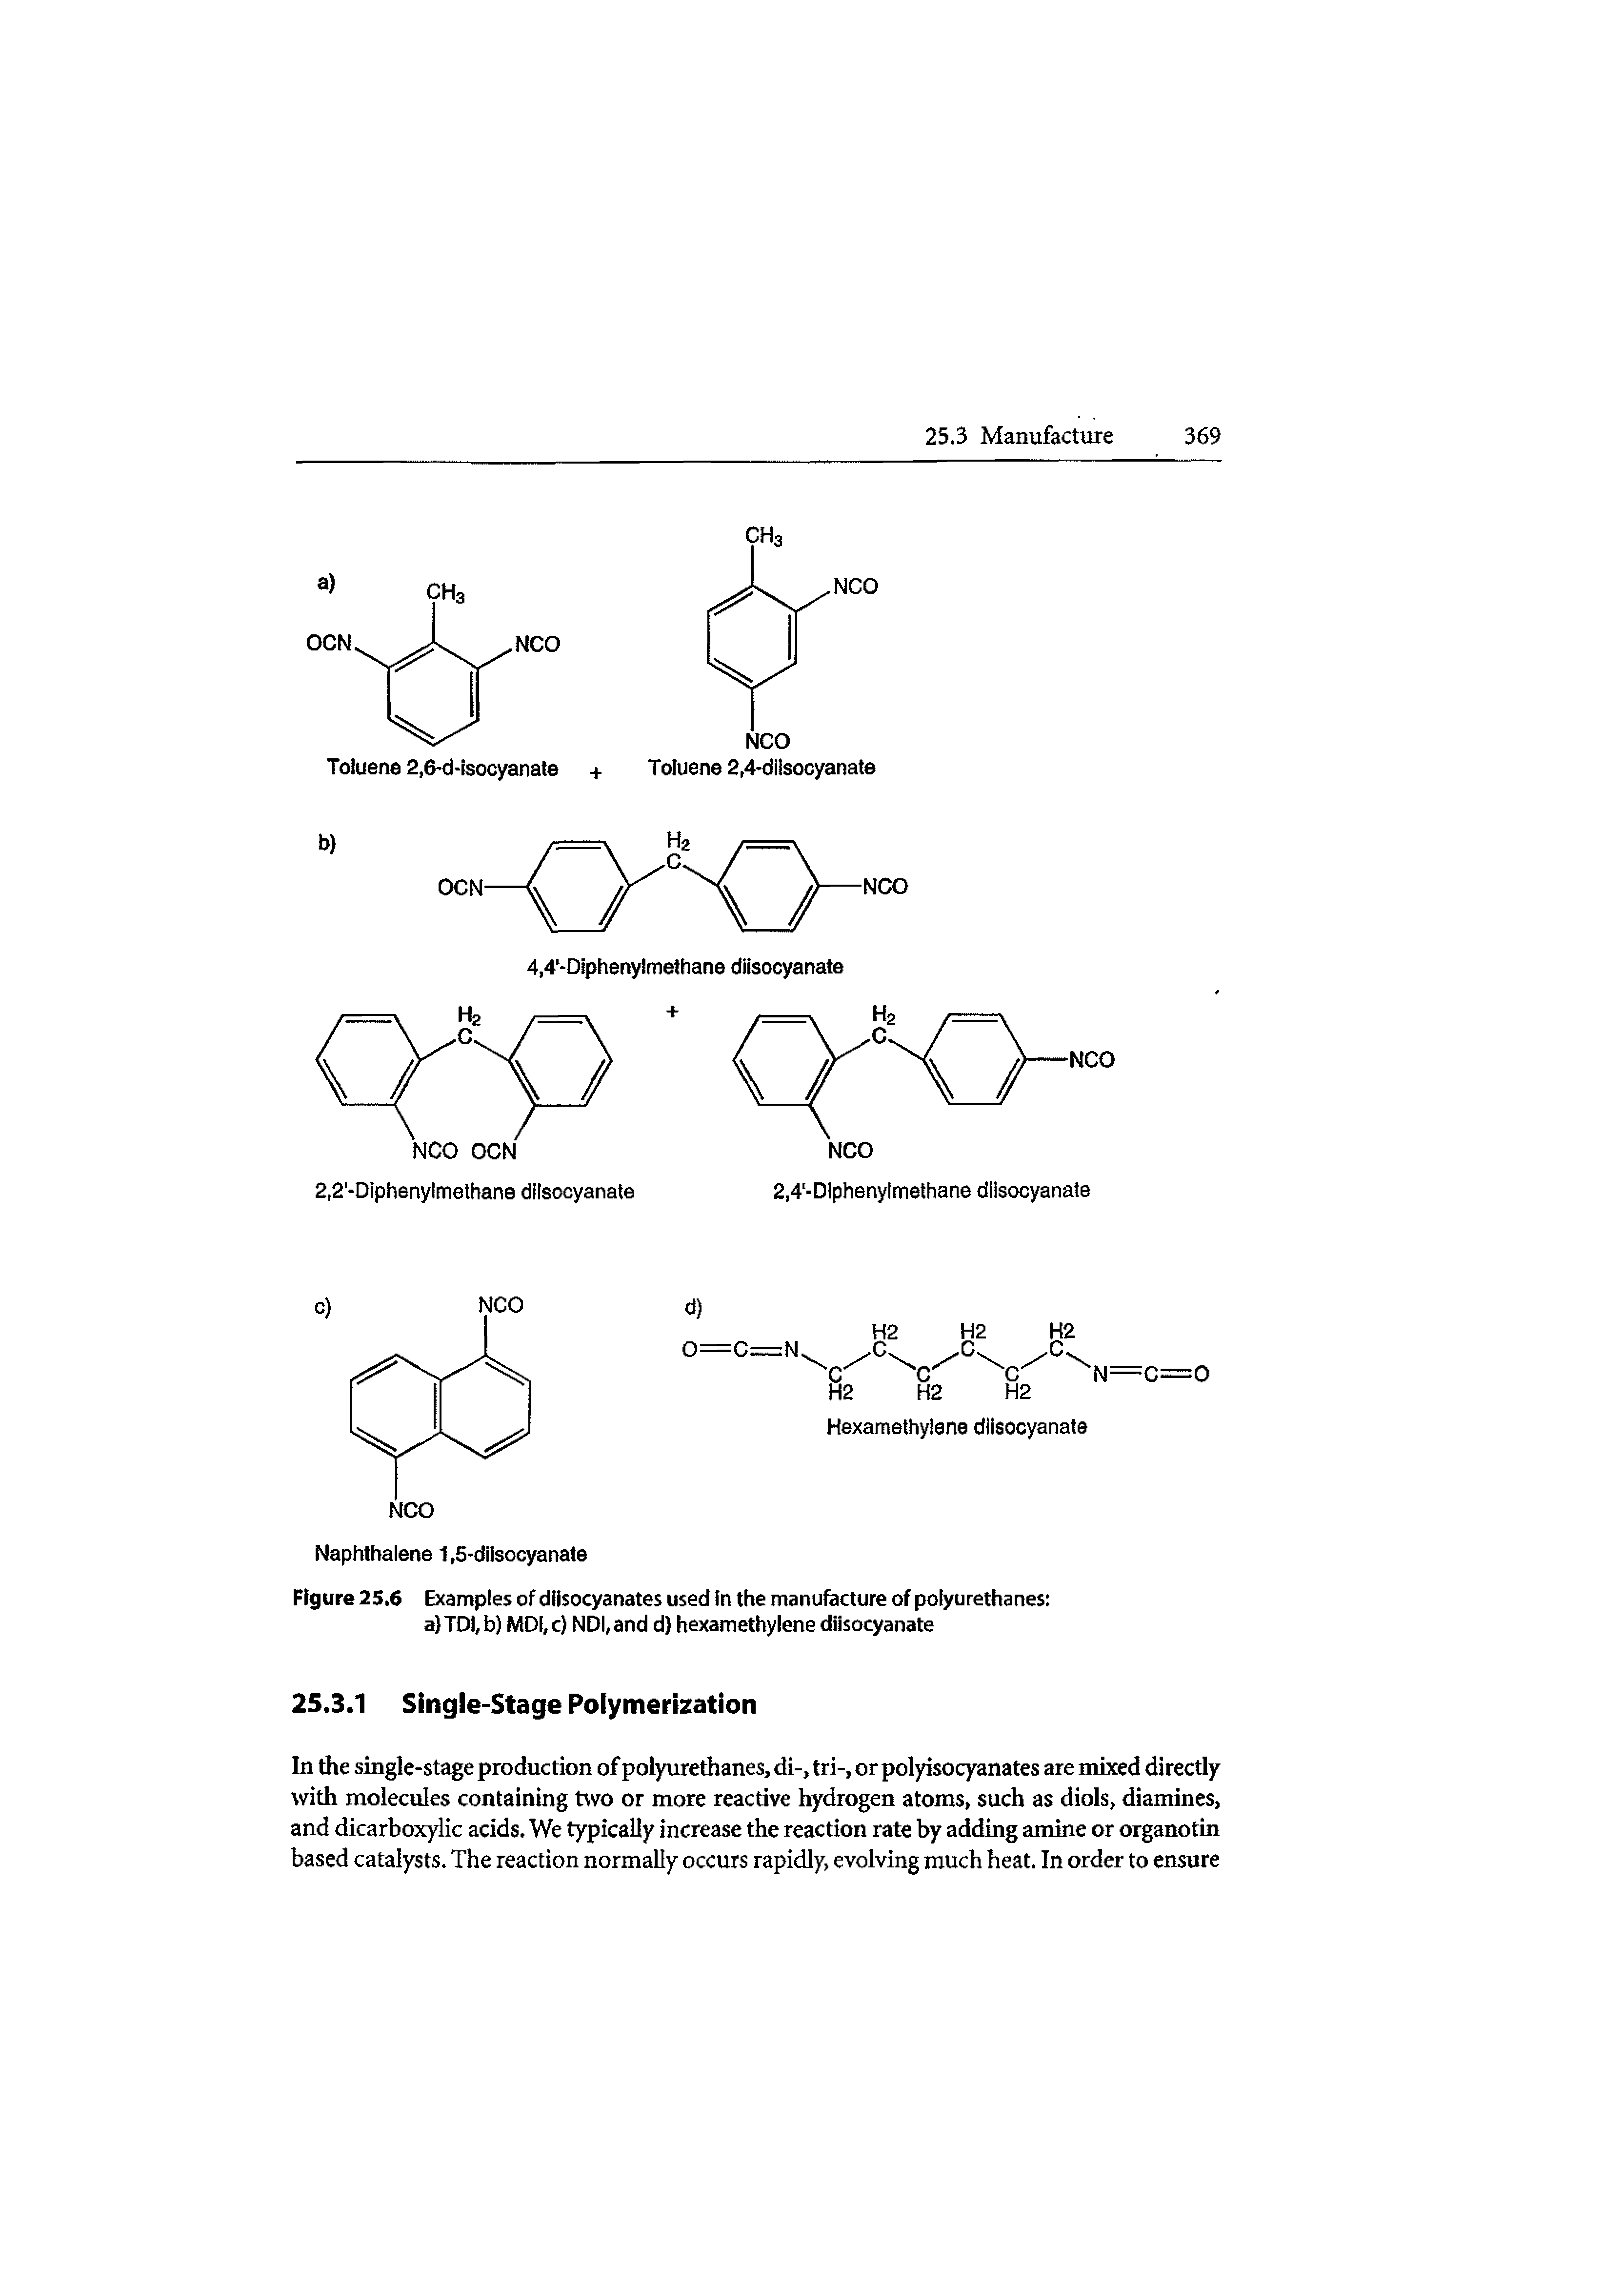 Figure 25.6 Examples of diisocyanates used in the manufacture of polyurethanes a TDI,b) MDi,c) NDI,and d) hexamethyiene diisocyanate...